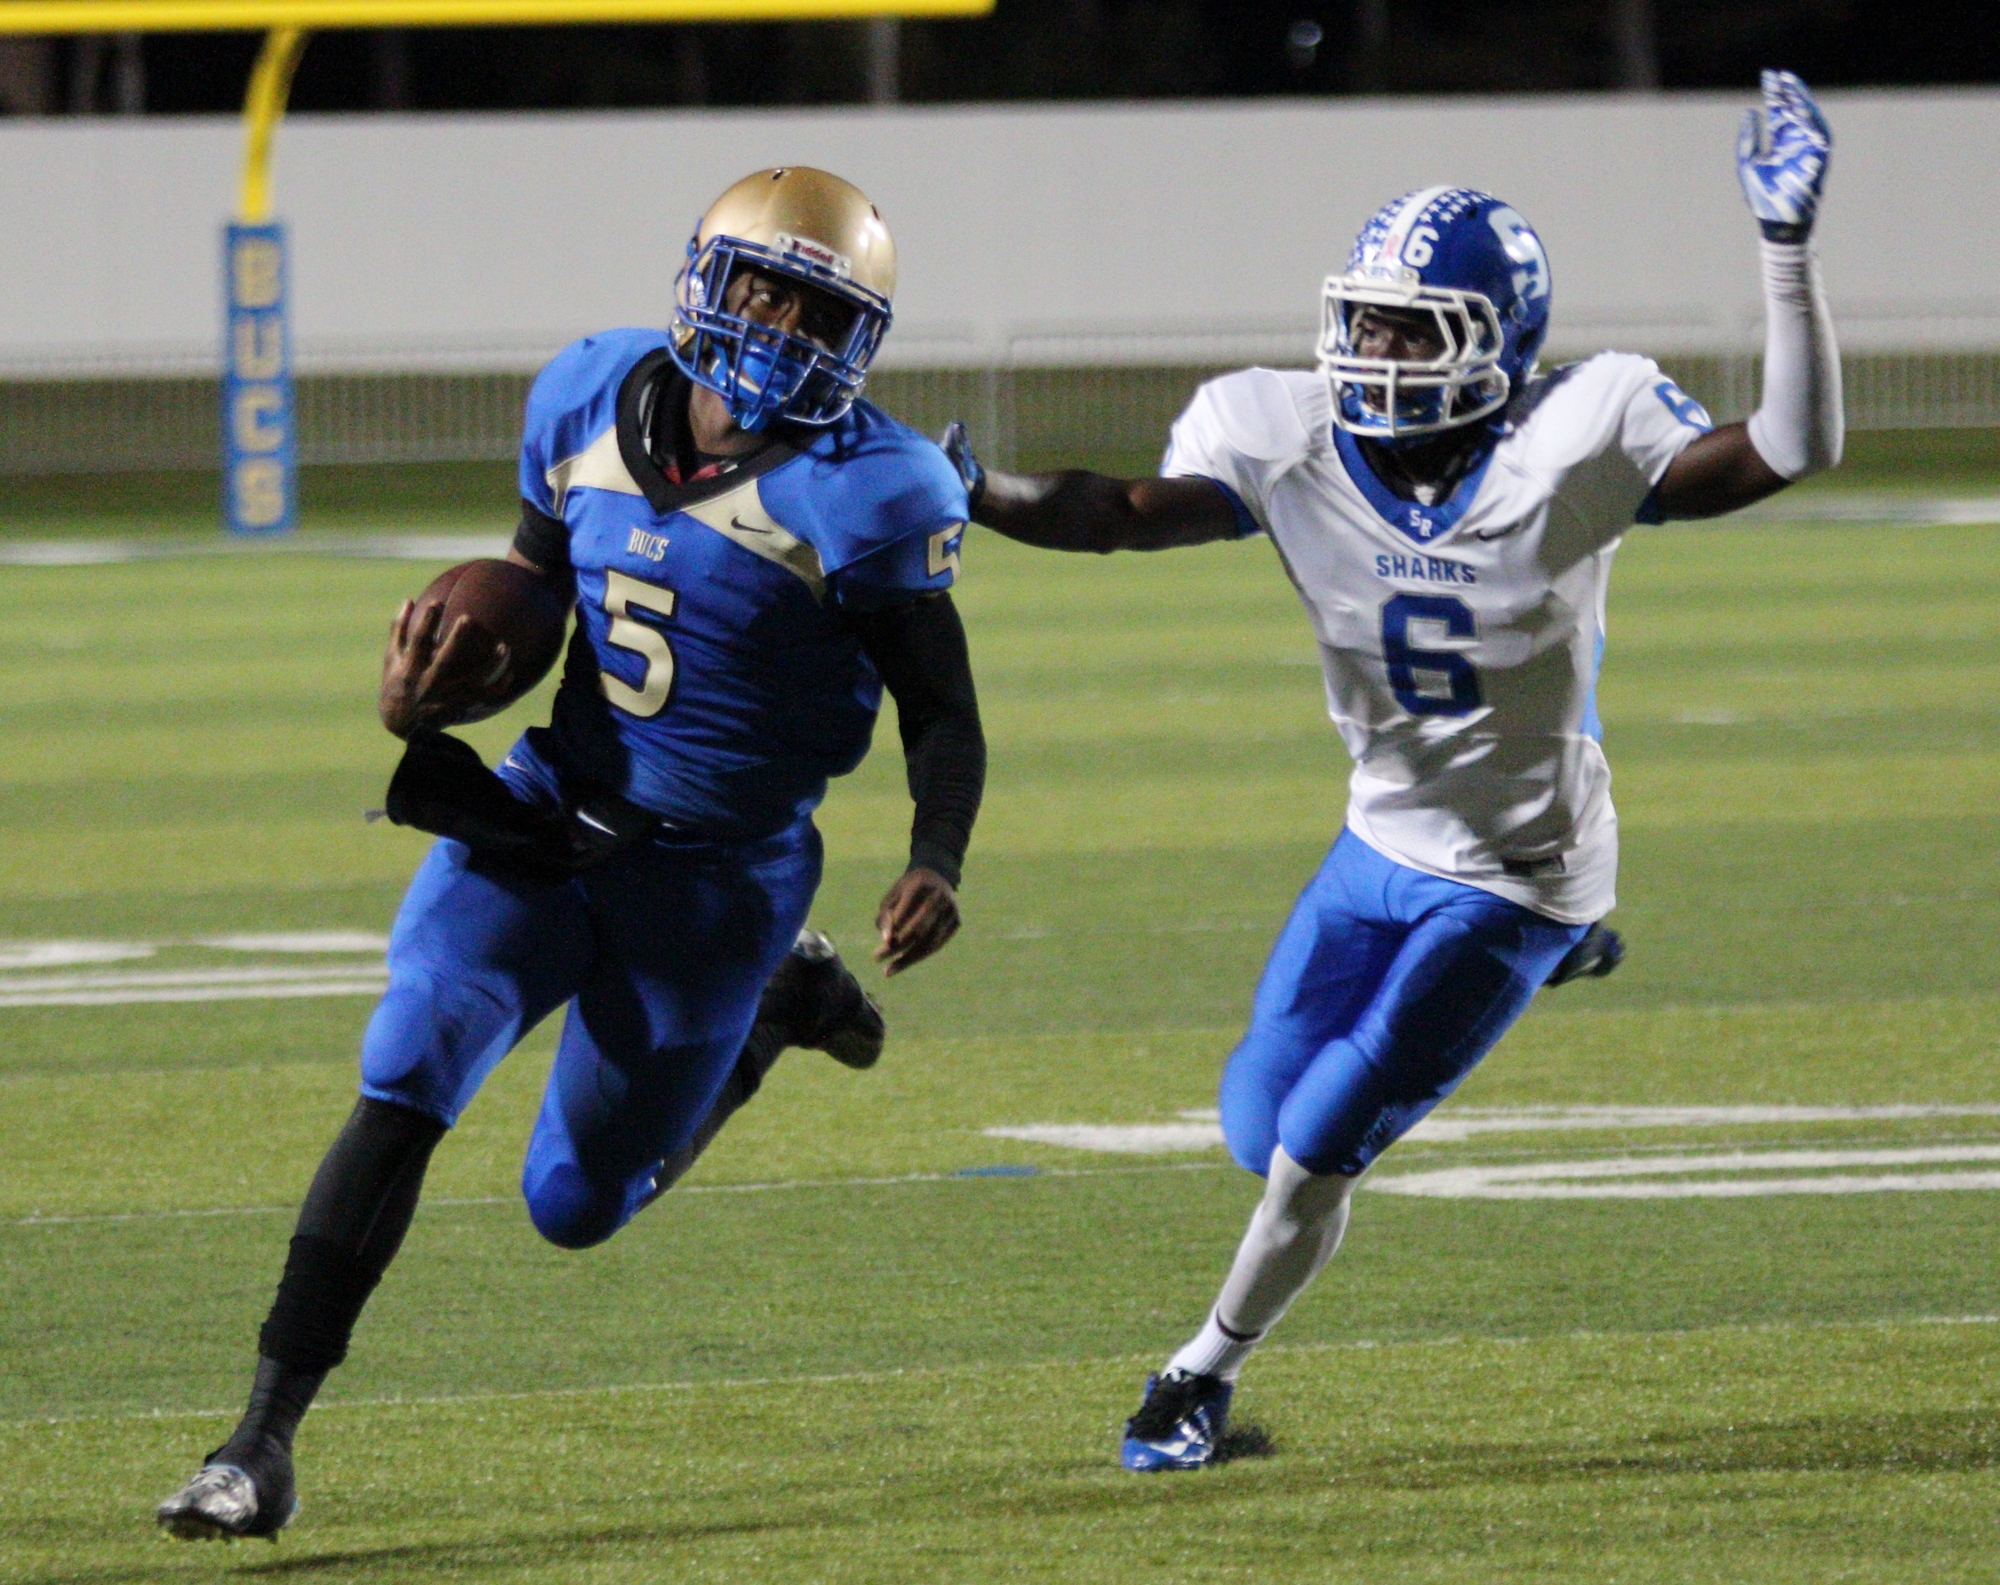 Denzel Houston scrambles for a big gain to set up a Mainland touchdown. Photos by Jeff Dawsey